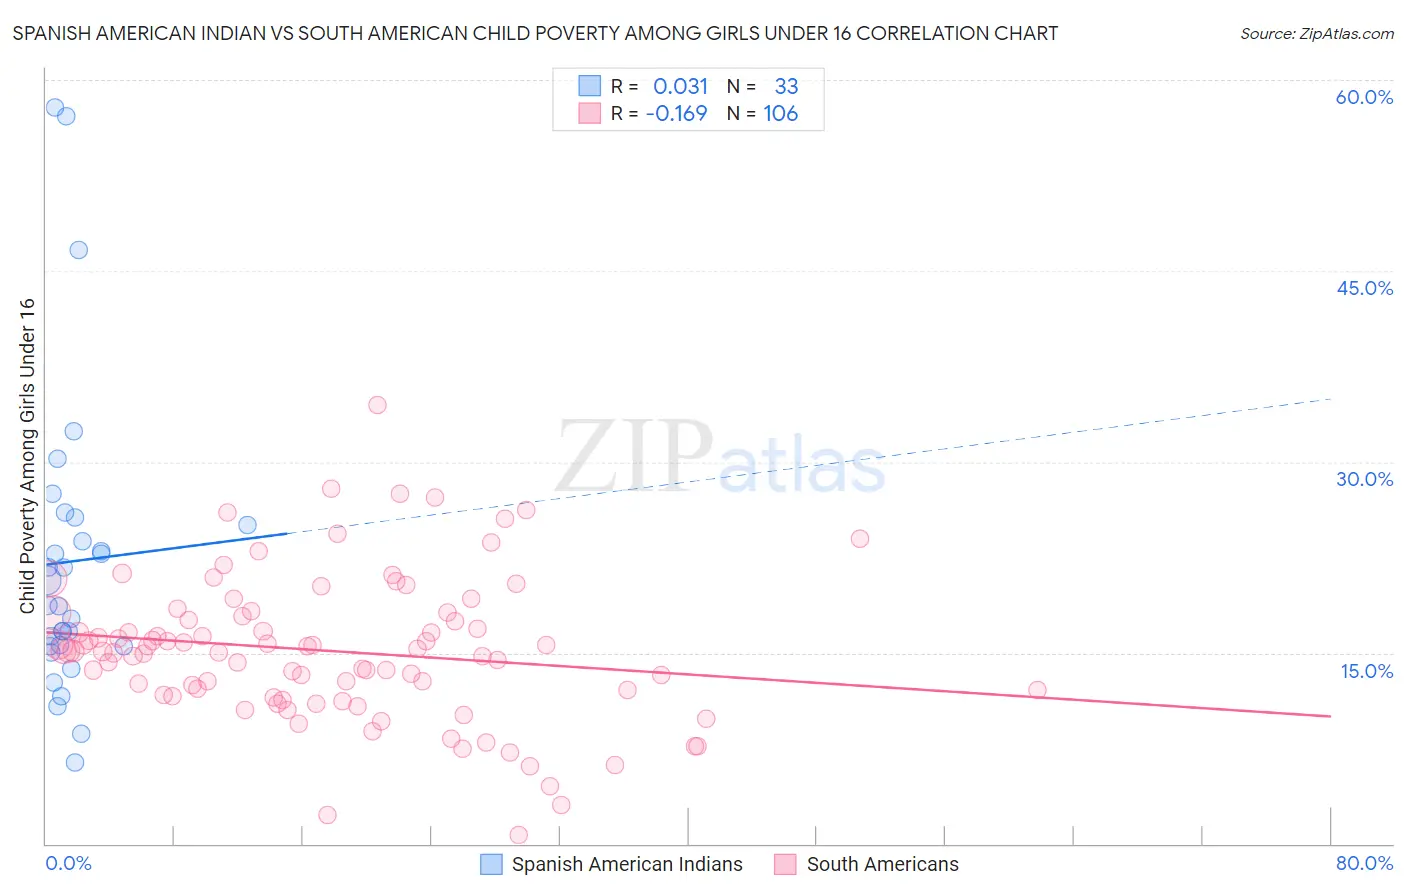 Spanish American Indian vs South American Child Poverty Among Girls Under 16